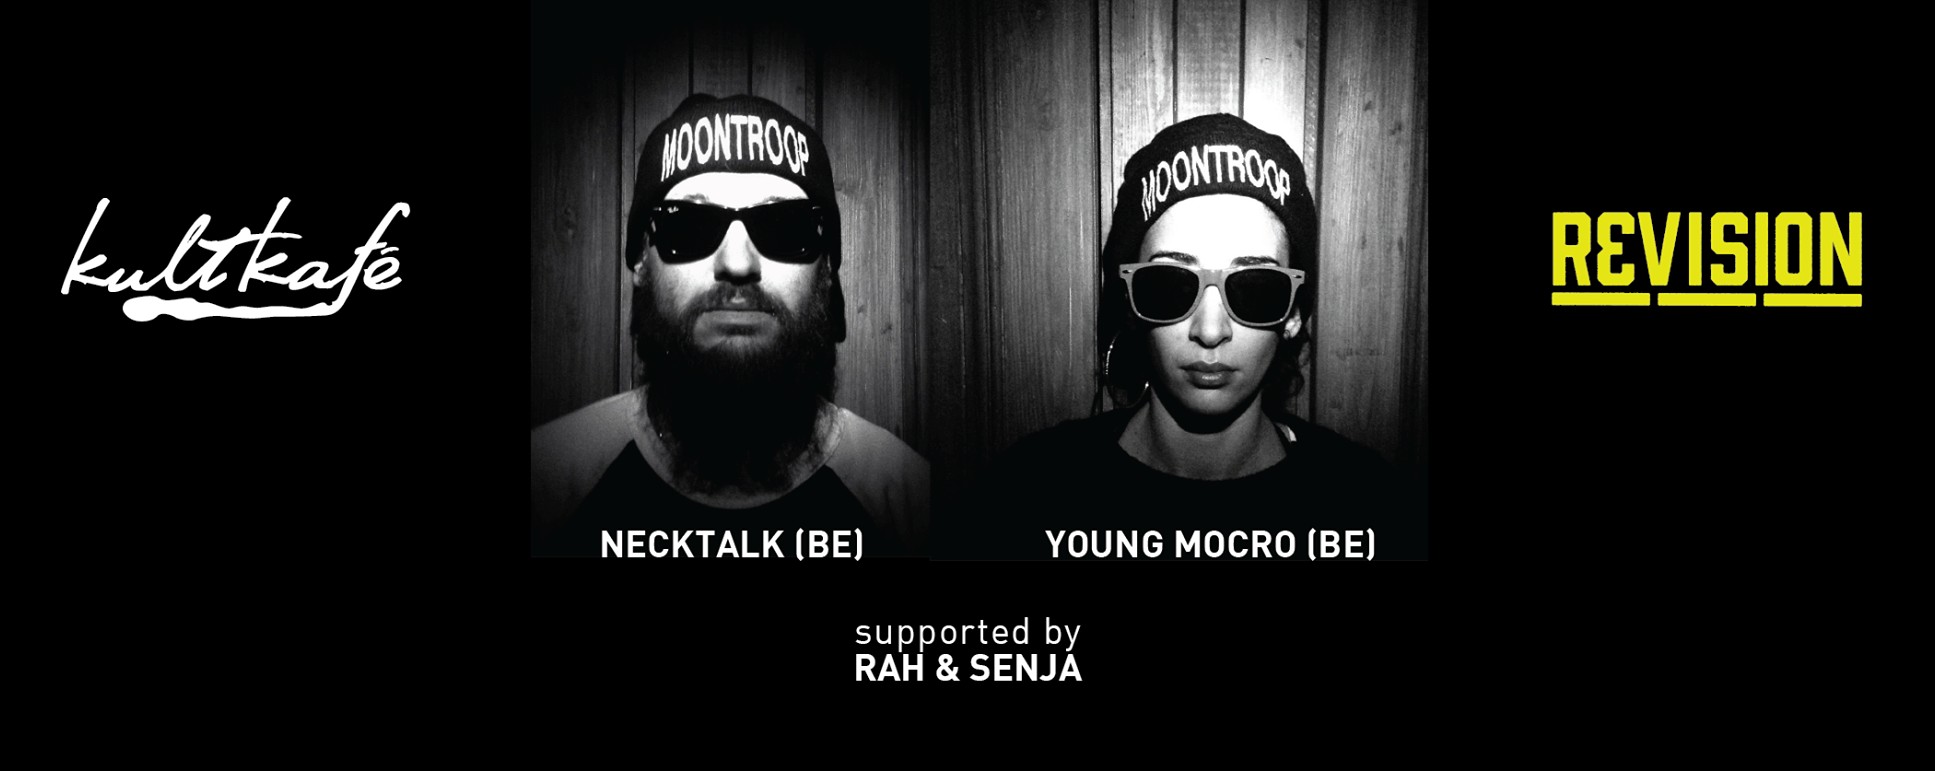 Revision Sessions: Young Mocro [Supafly BE] Necktalk [Moontroop BE] + RAH & SENJA [Revision SG]